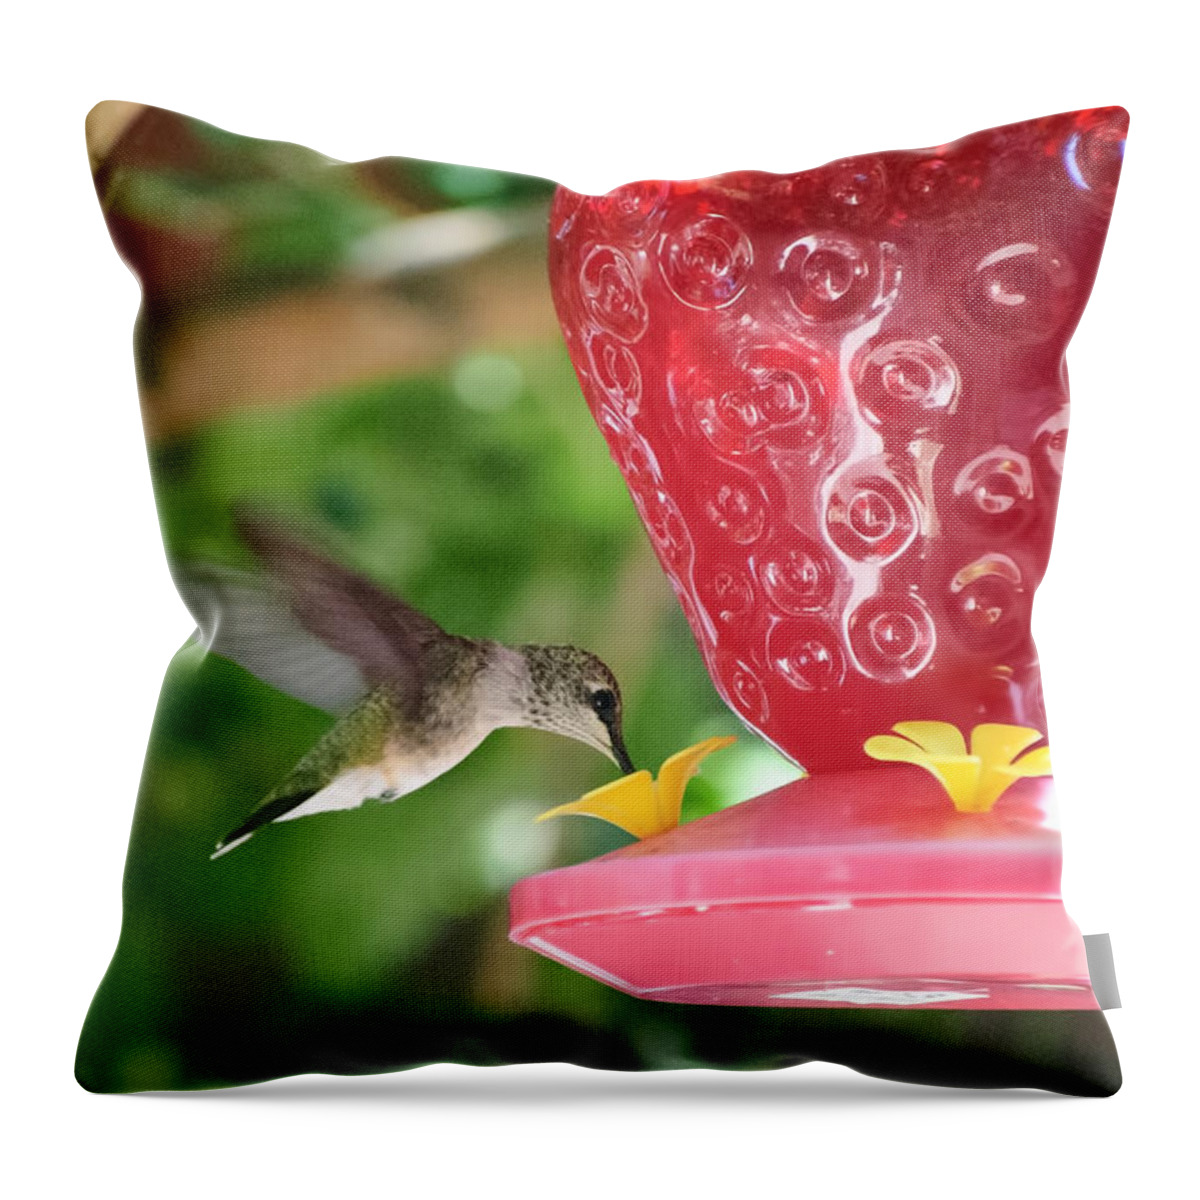 Hummingbird Throw Pillow featuring the photograph Hummingbird Sipping by Diego Re